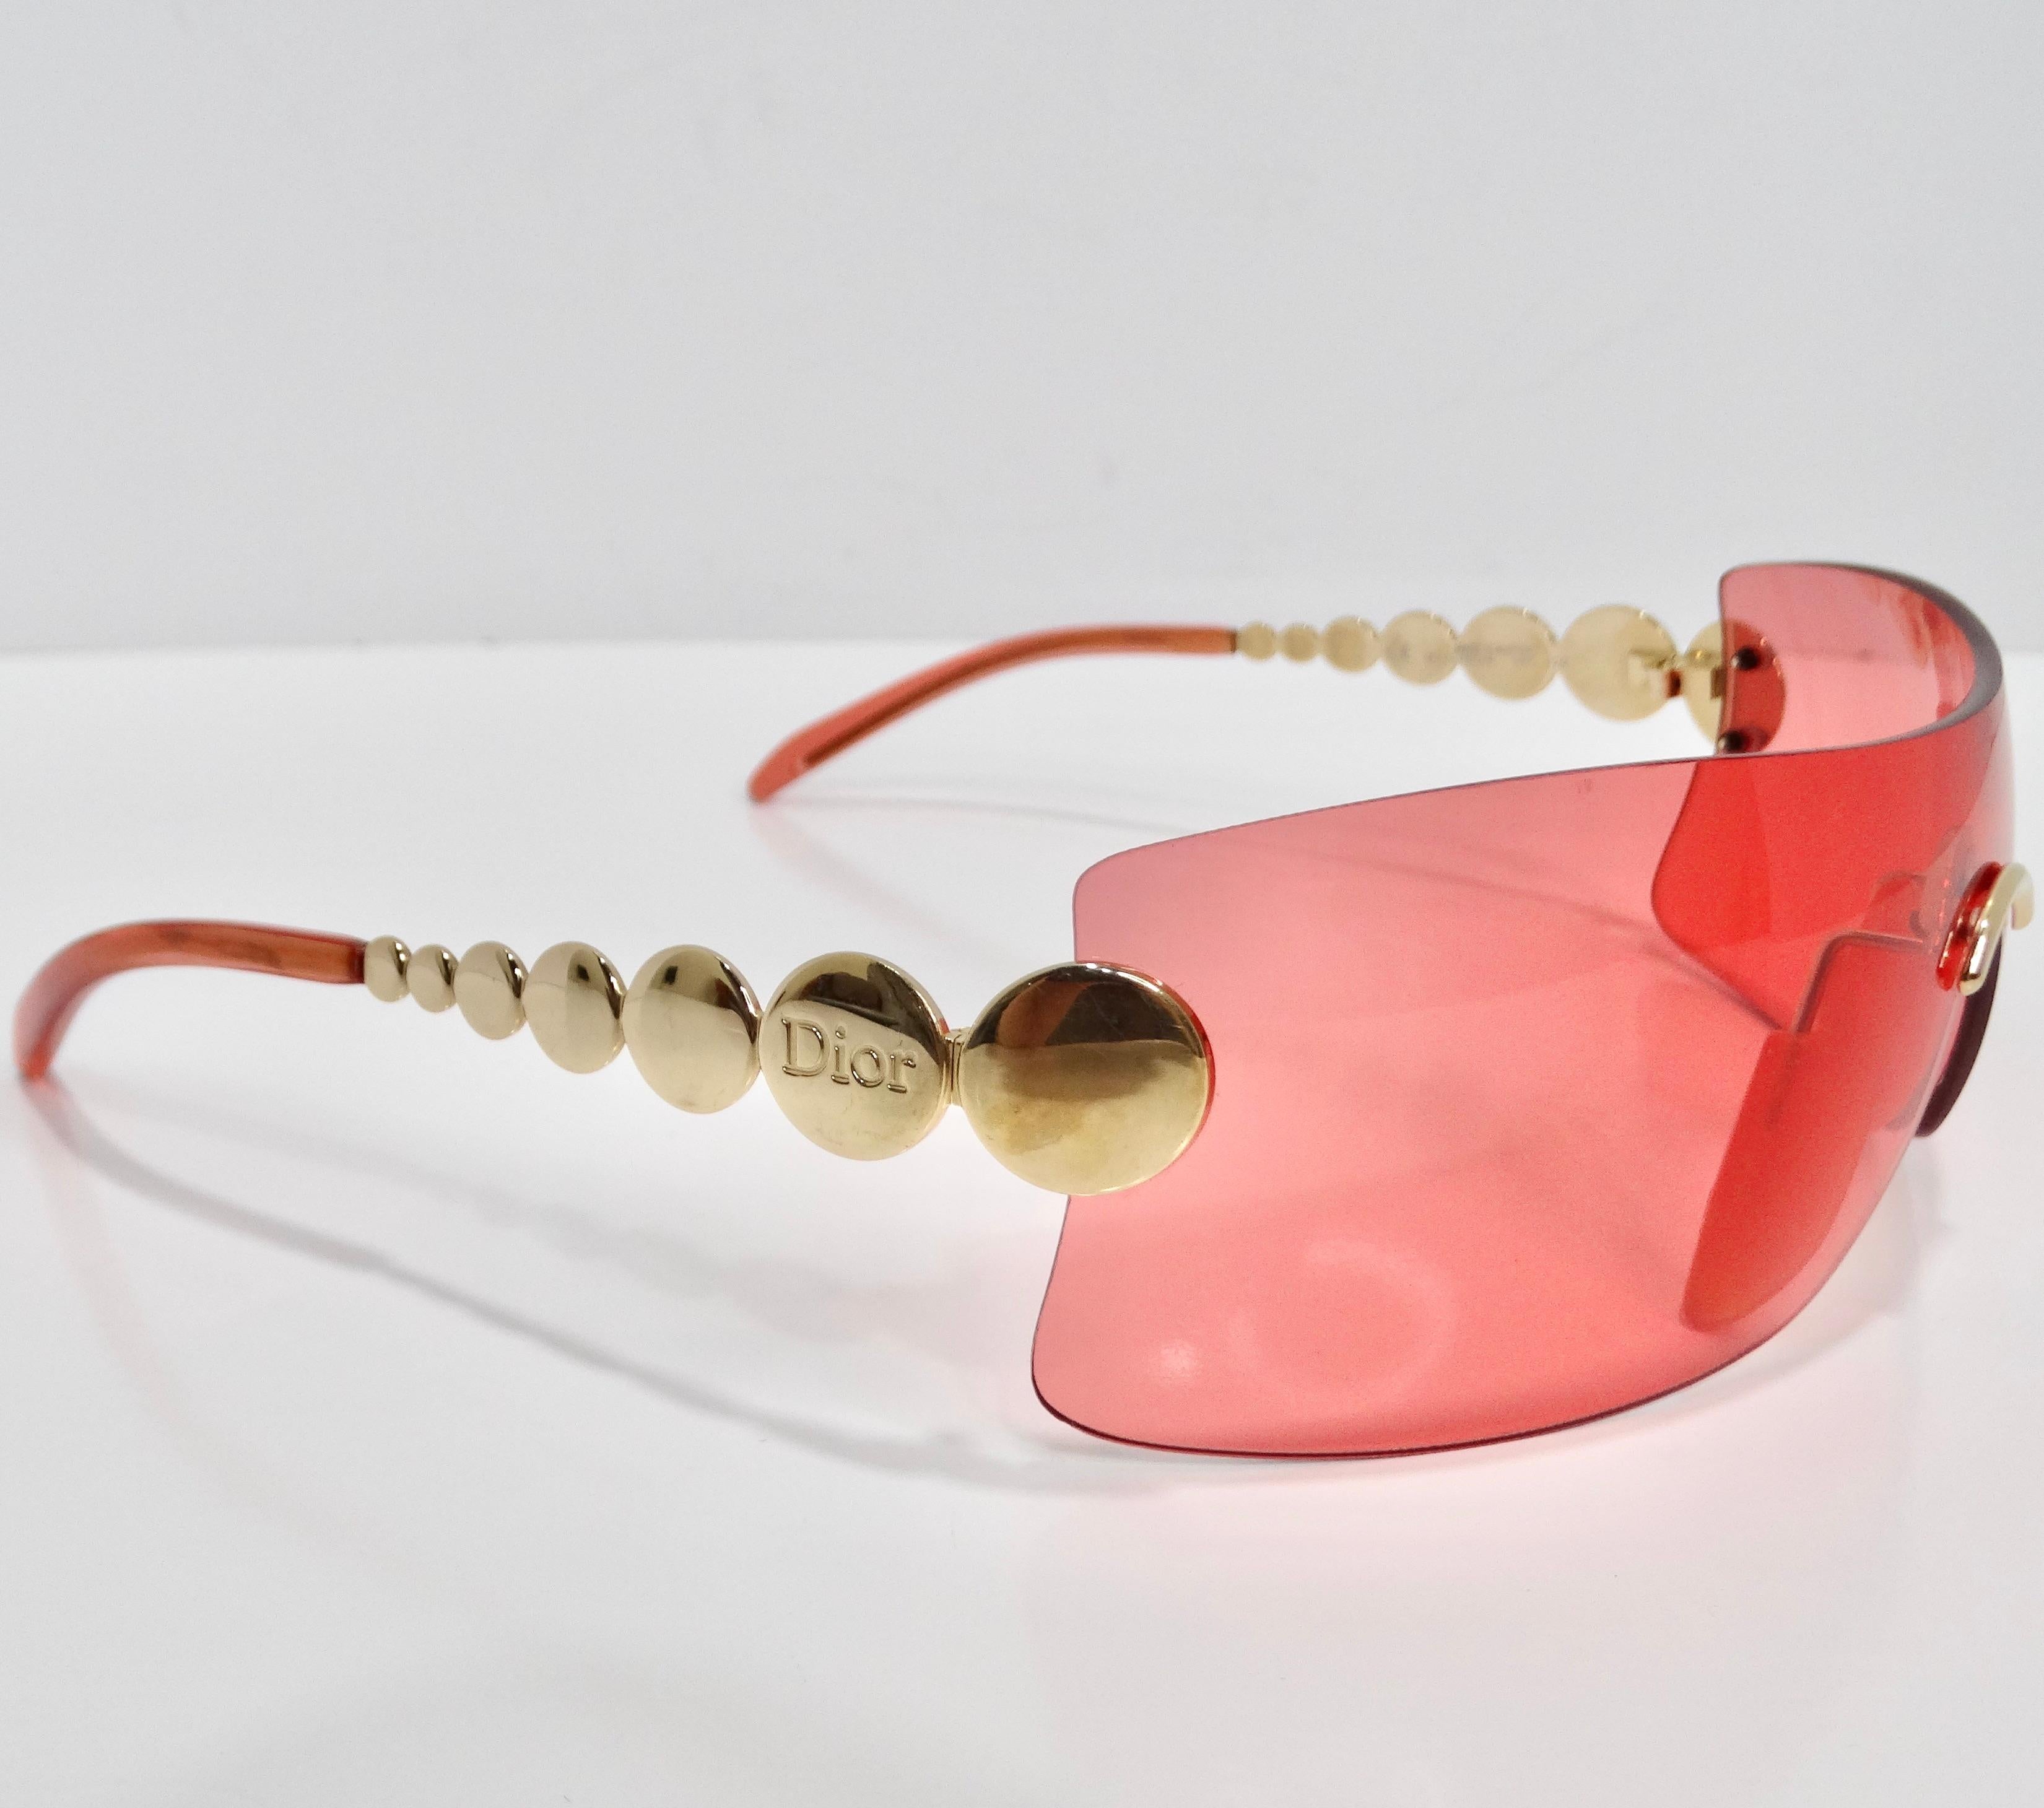 Christian Dior Spring 2004 Galliano Red Mask Sunglasses For Sale 1